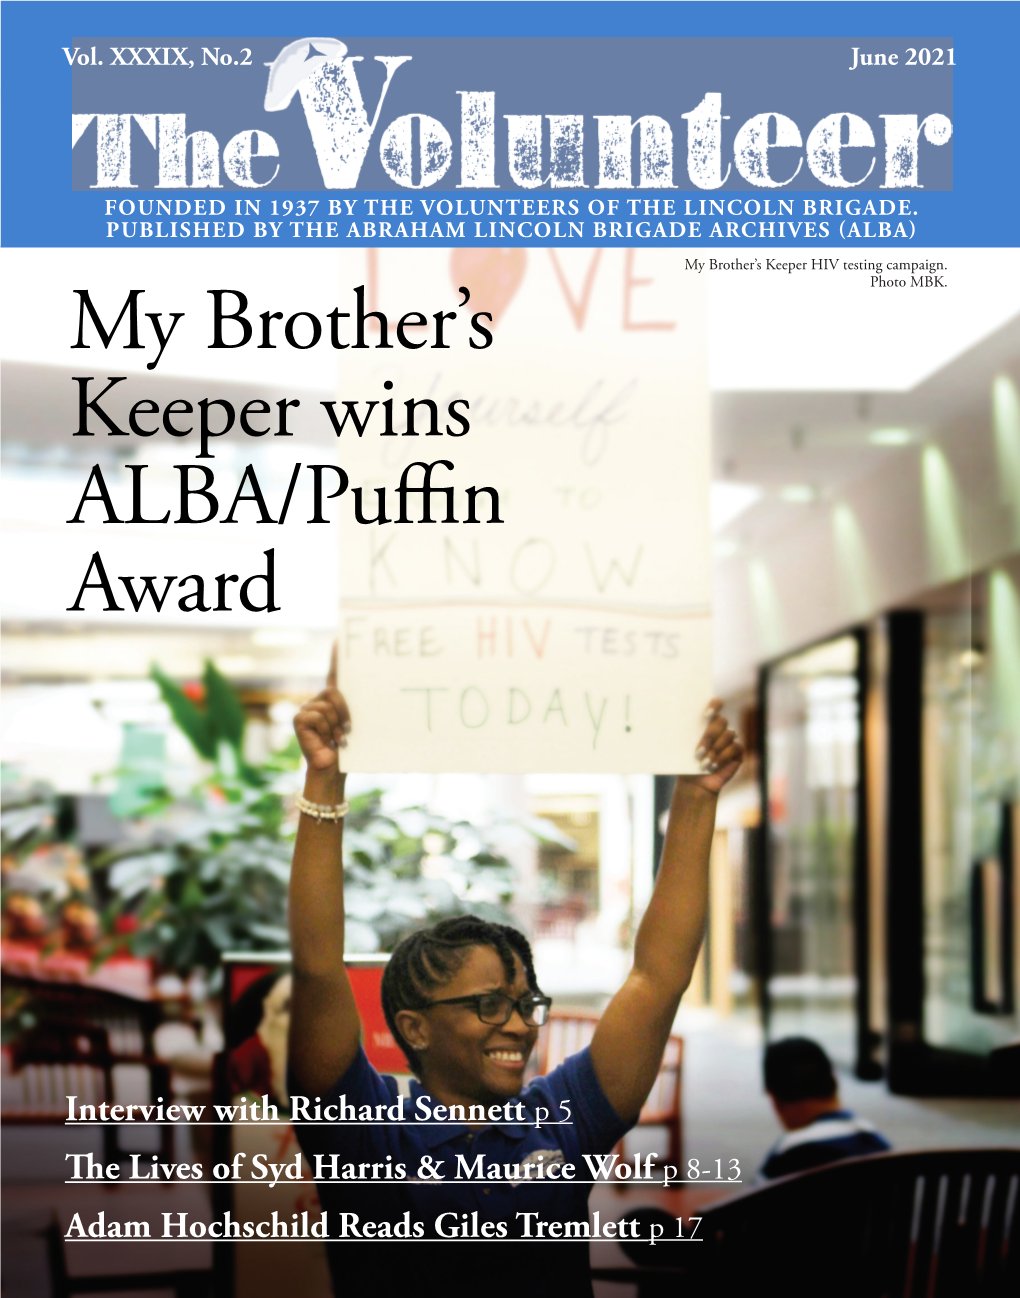 My Brother's Keeper Wins ALBA/Puffin Award